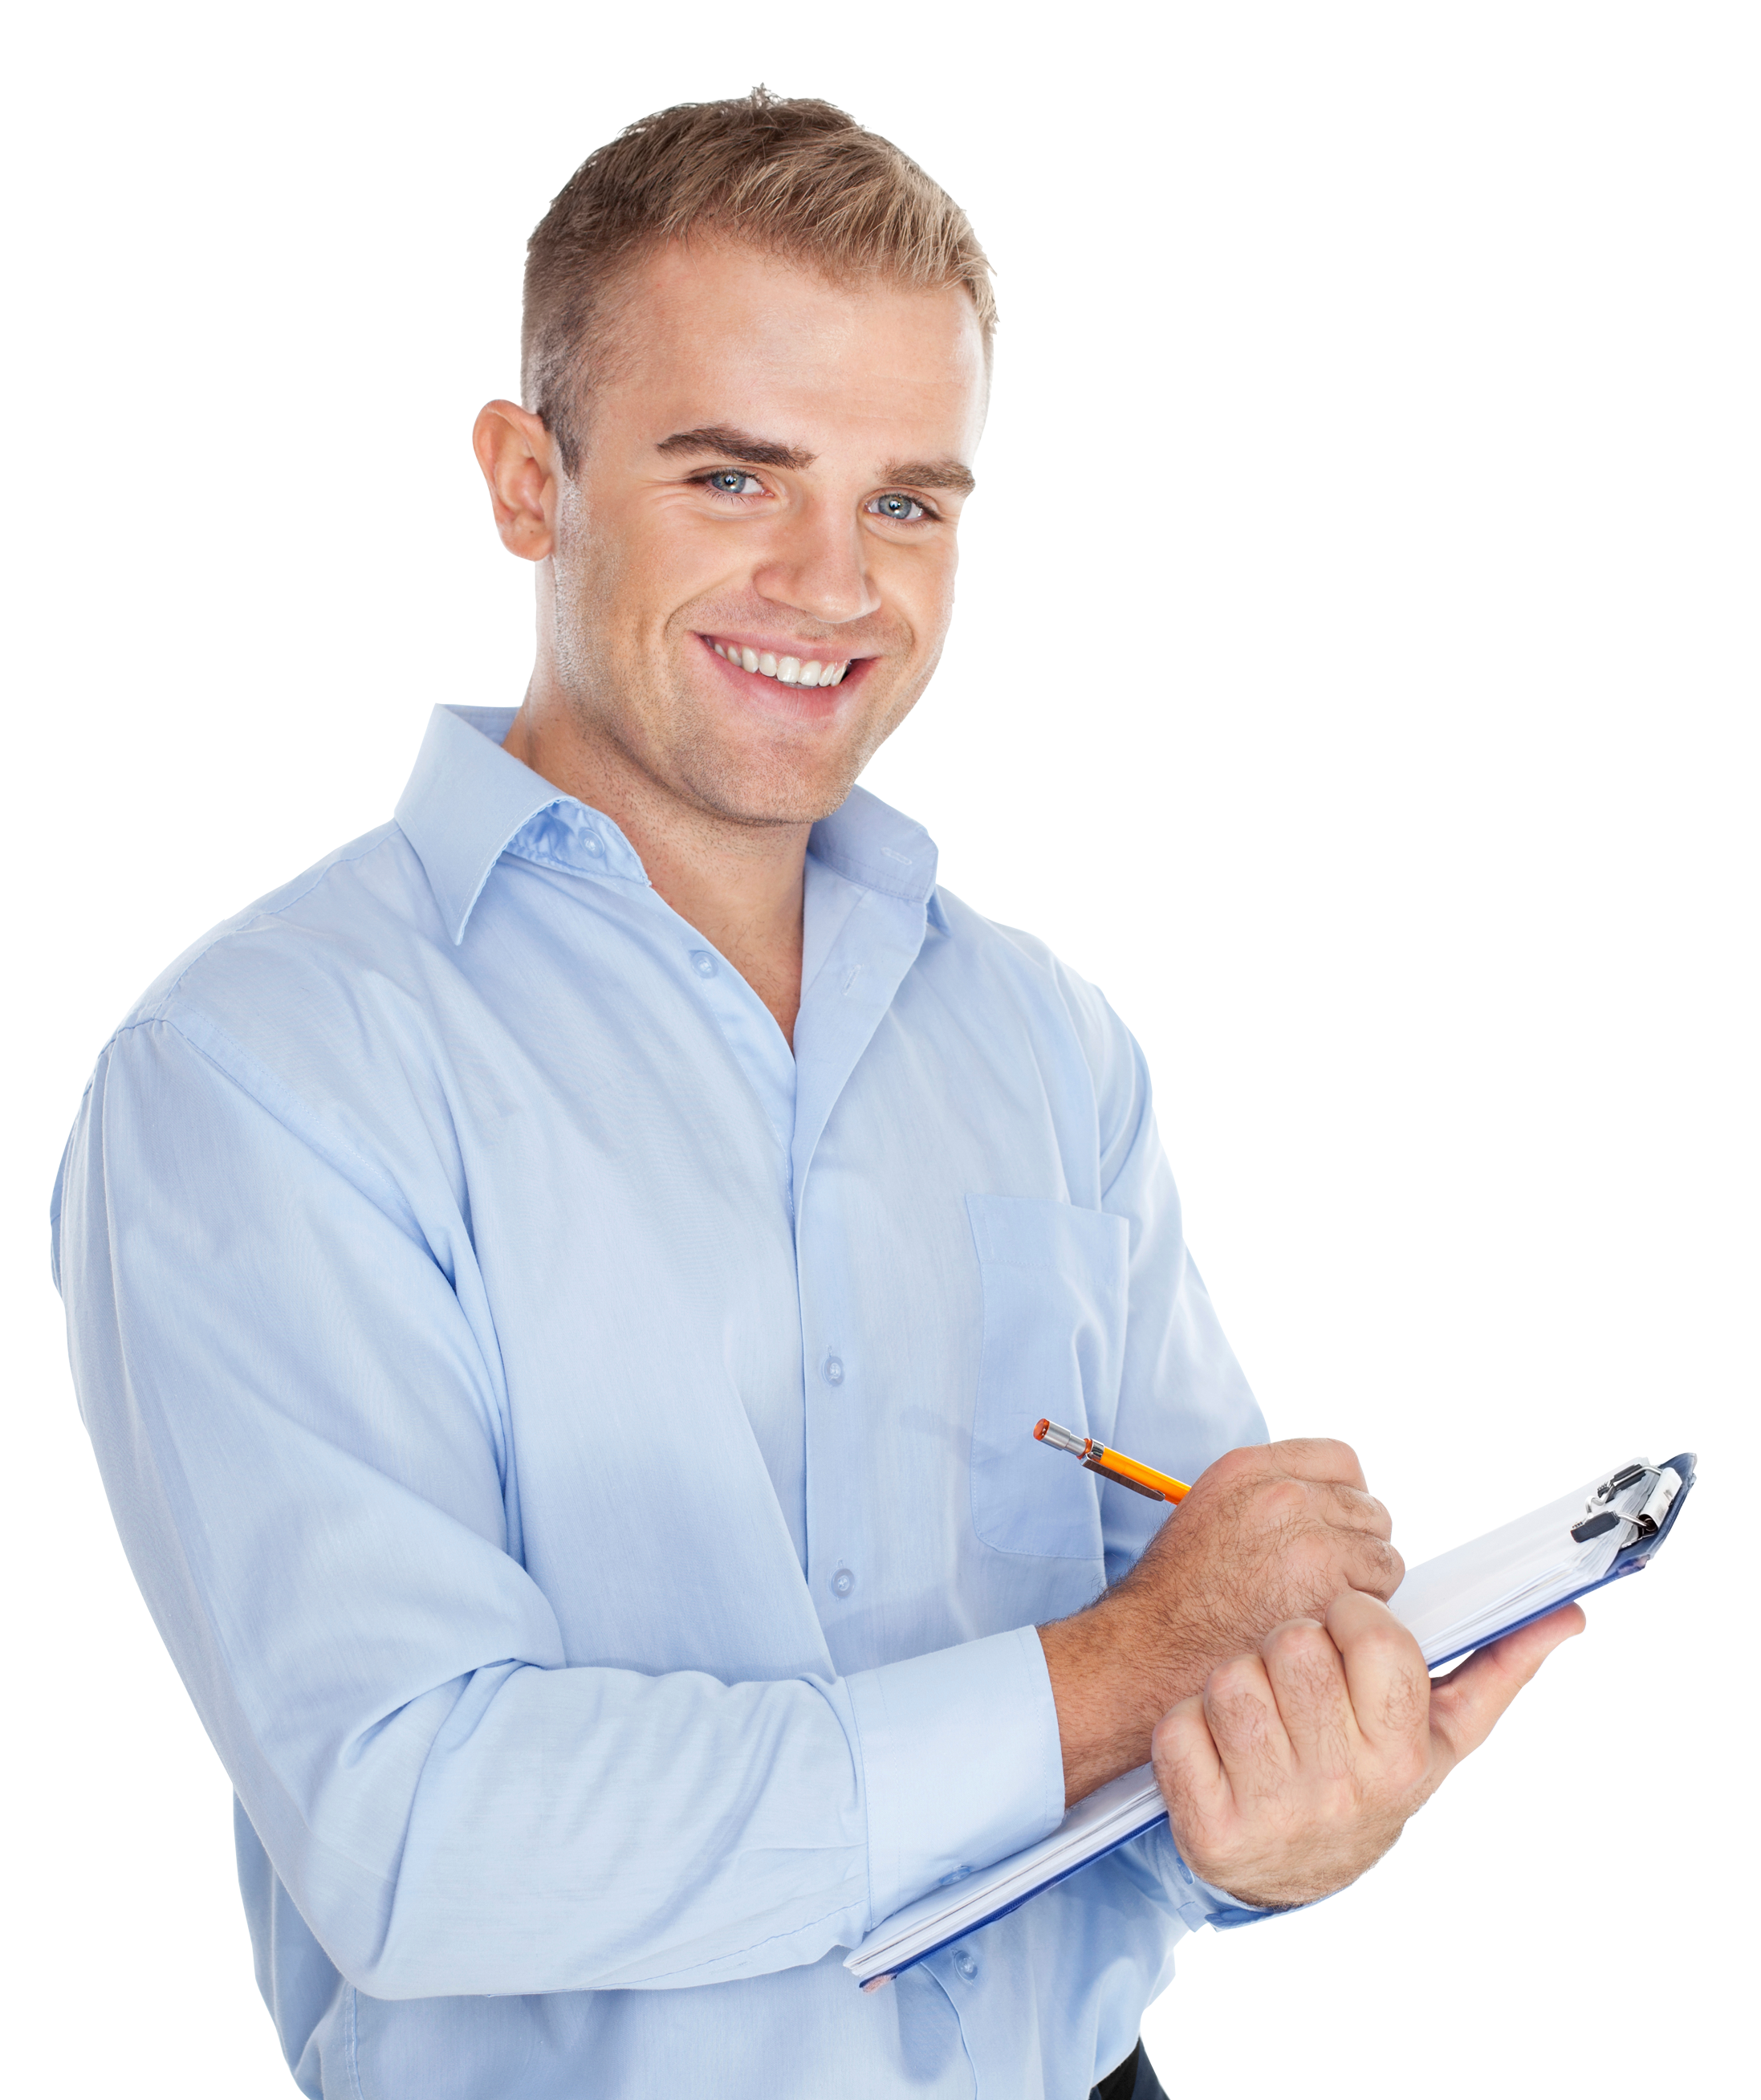 00219426161716-young-business-man-taking-notes164167575.png